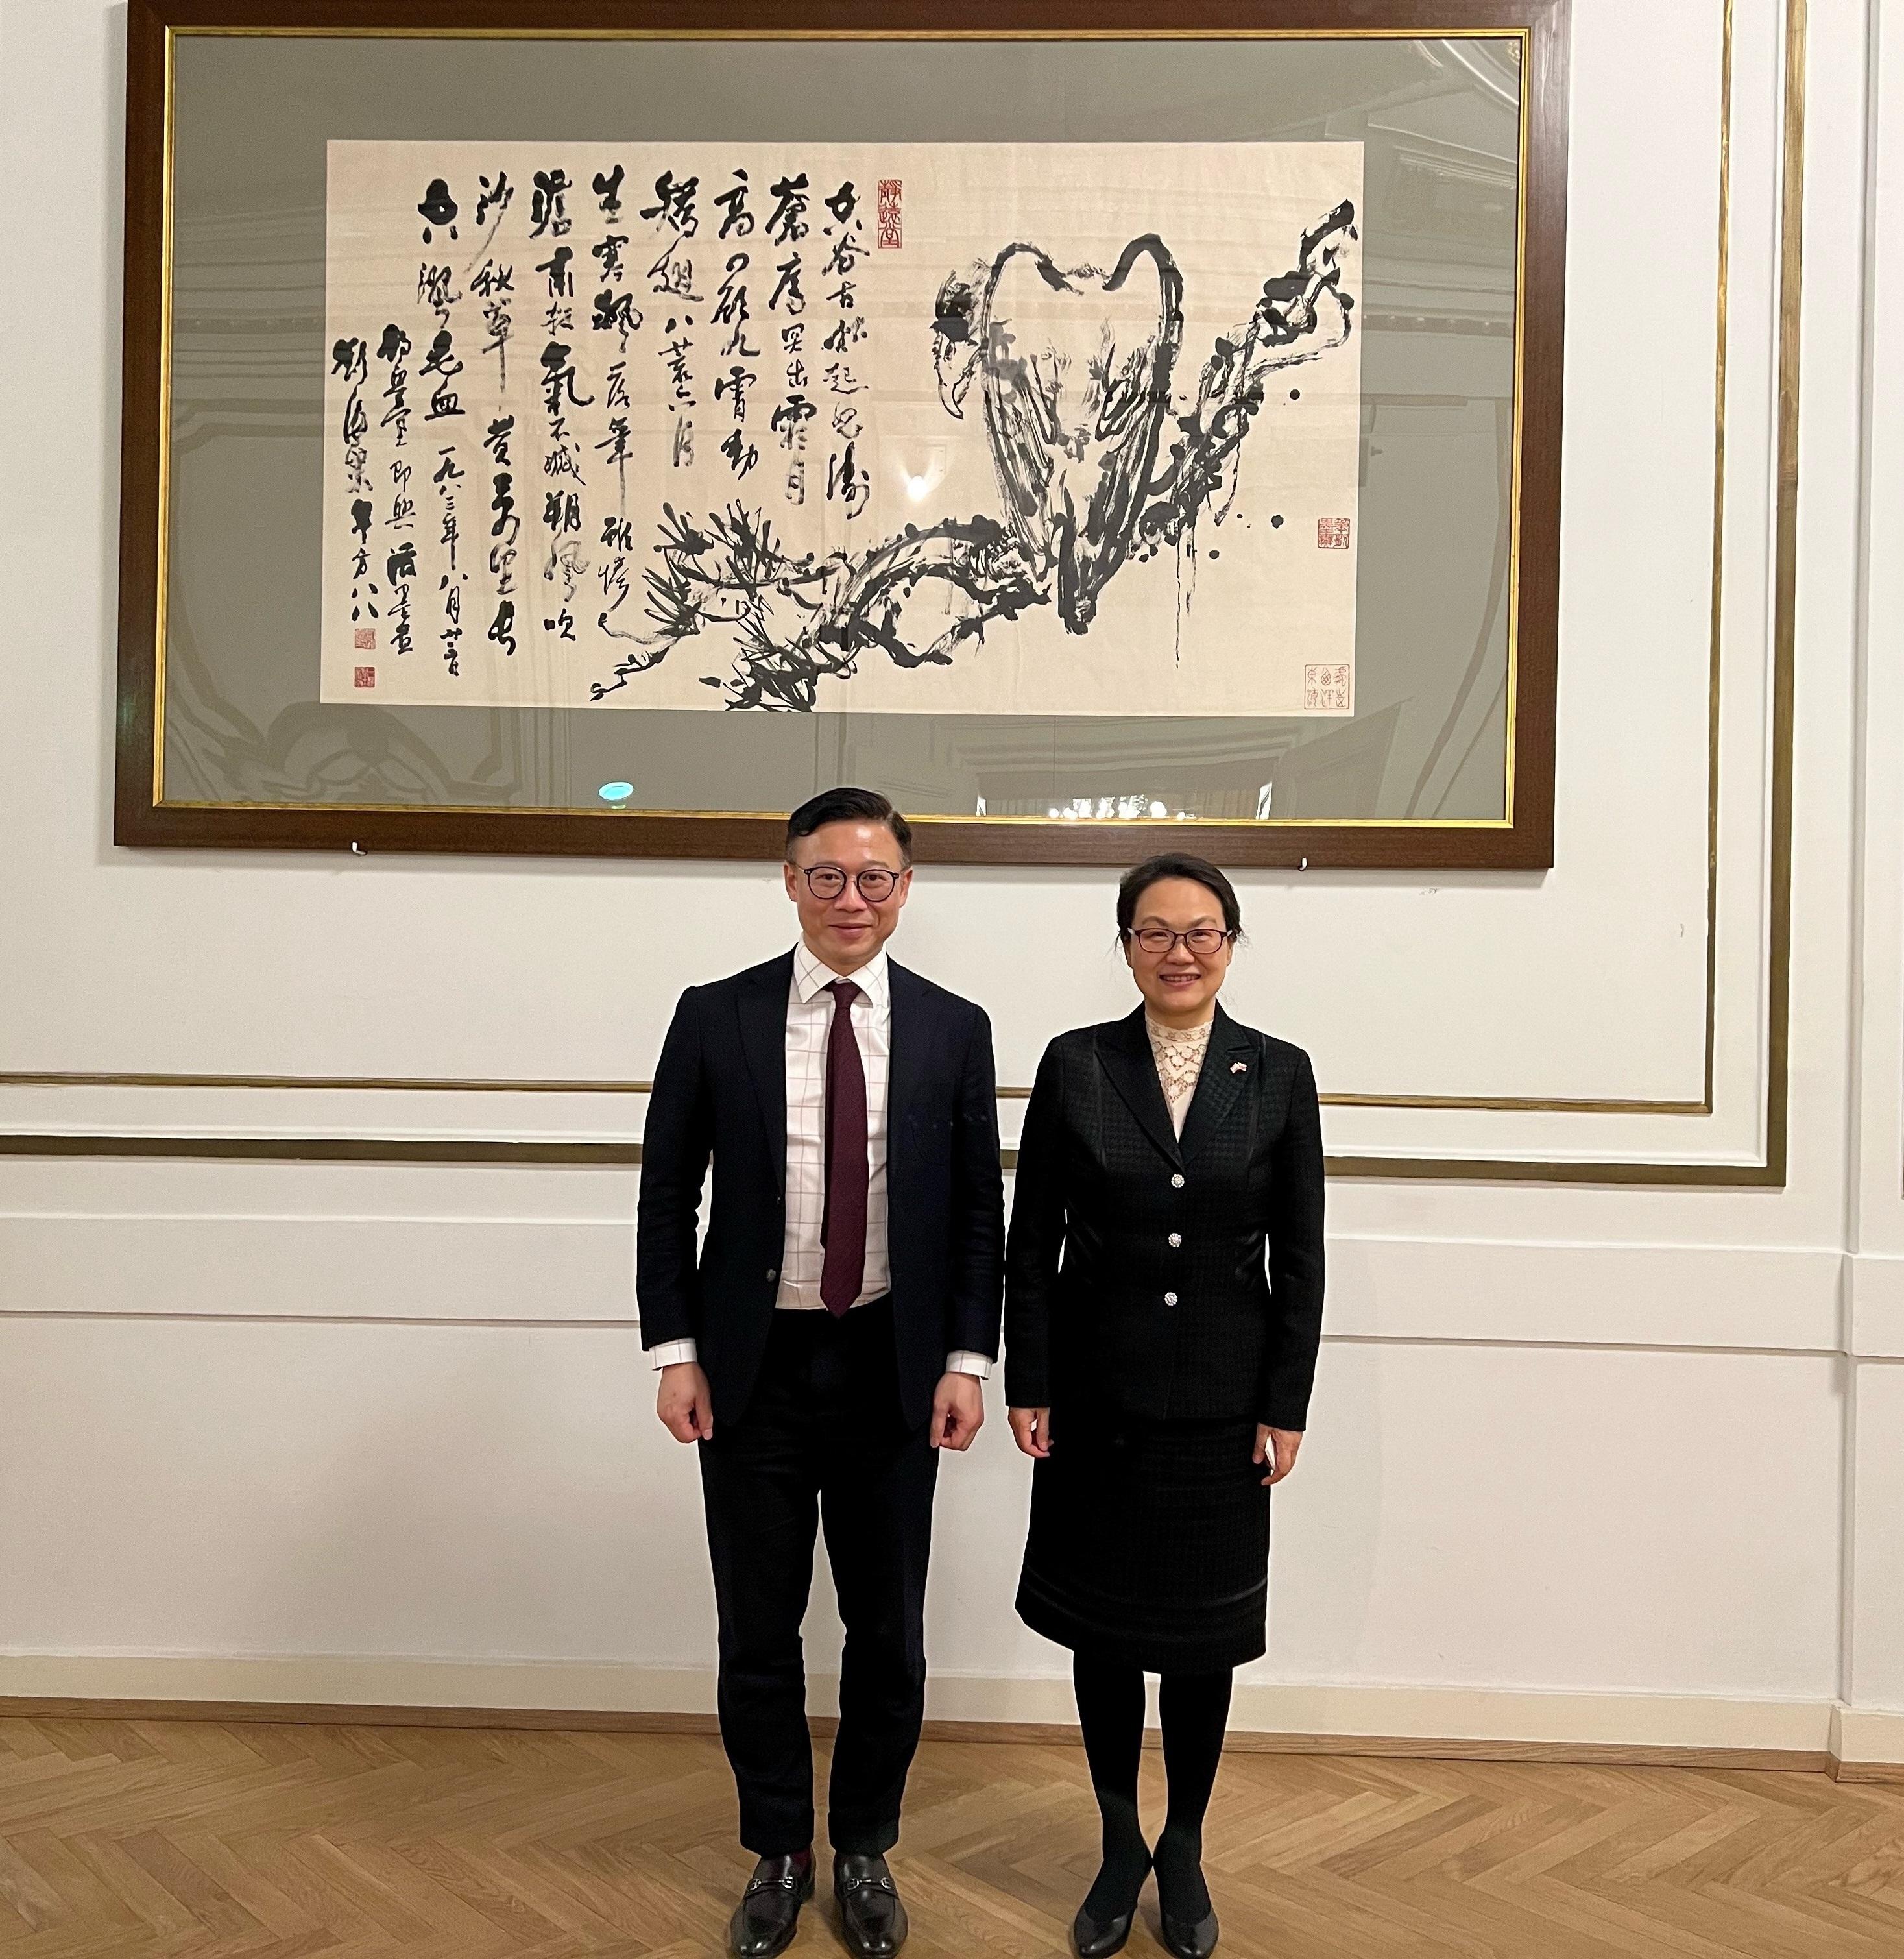 The Deputy Secretary for Justice, Mr Cheung Kwok-kwan (left), called on the Ambassador Extraordinary and Plenipotentiary of the People's Republic of China to the Republic of Austria, Ms Qi Mei (right), in Vienna, Austria, on March 7 (Vienna time).
